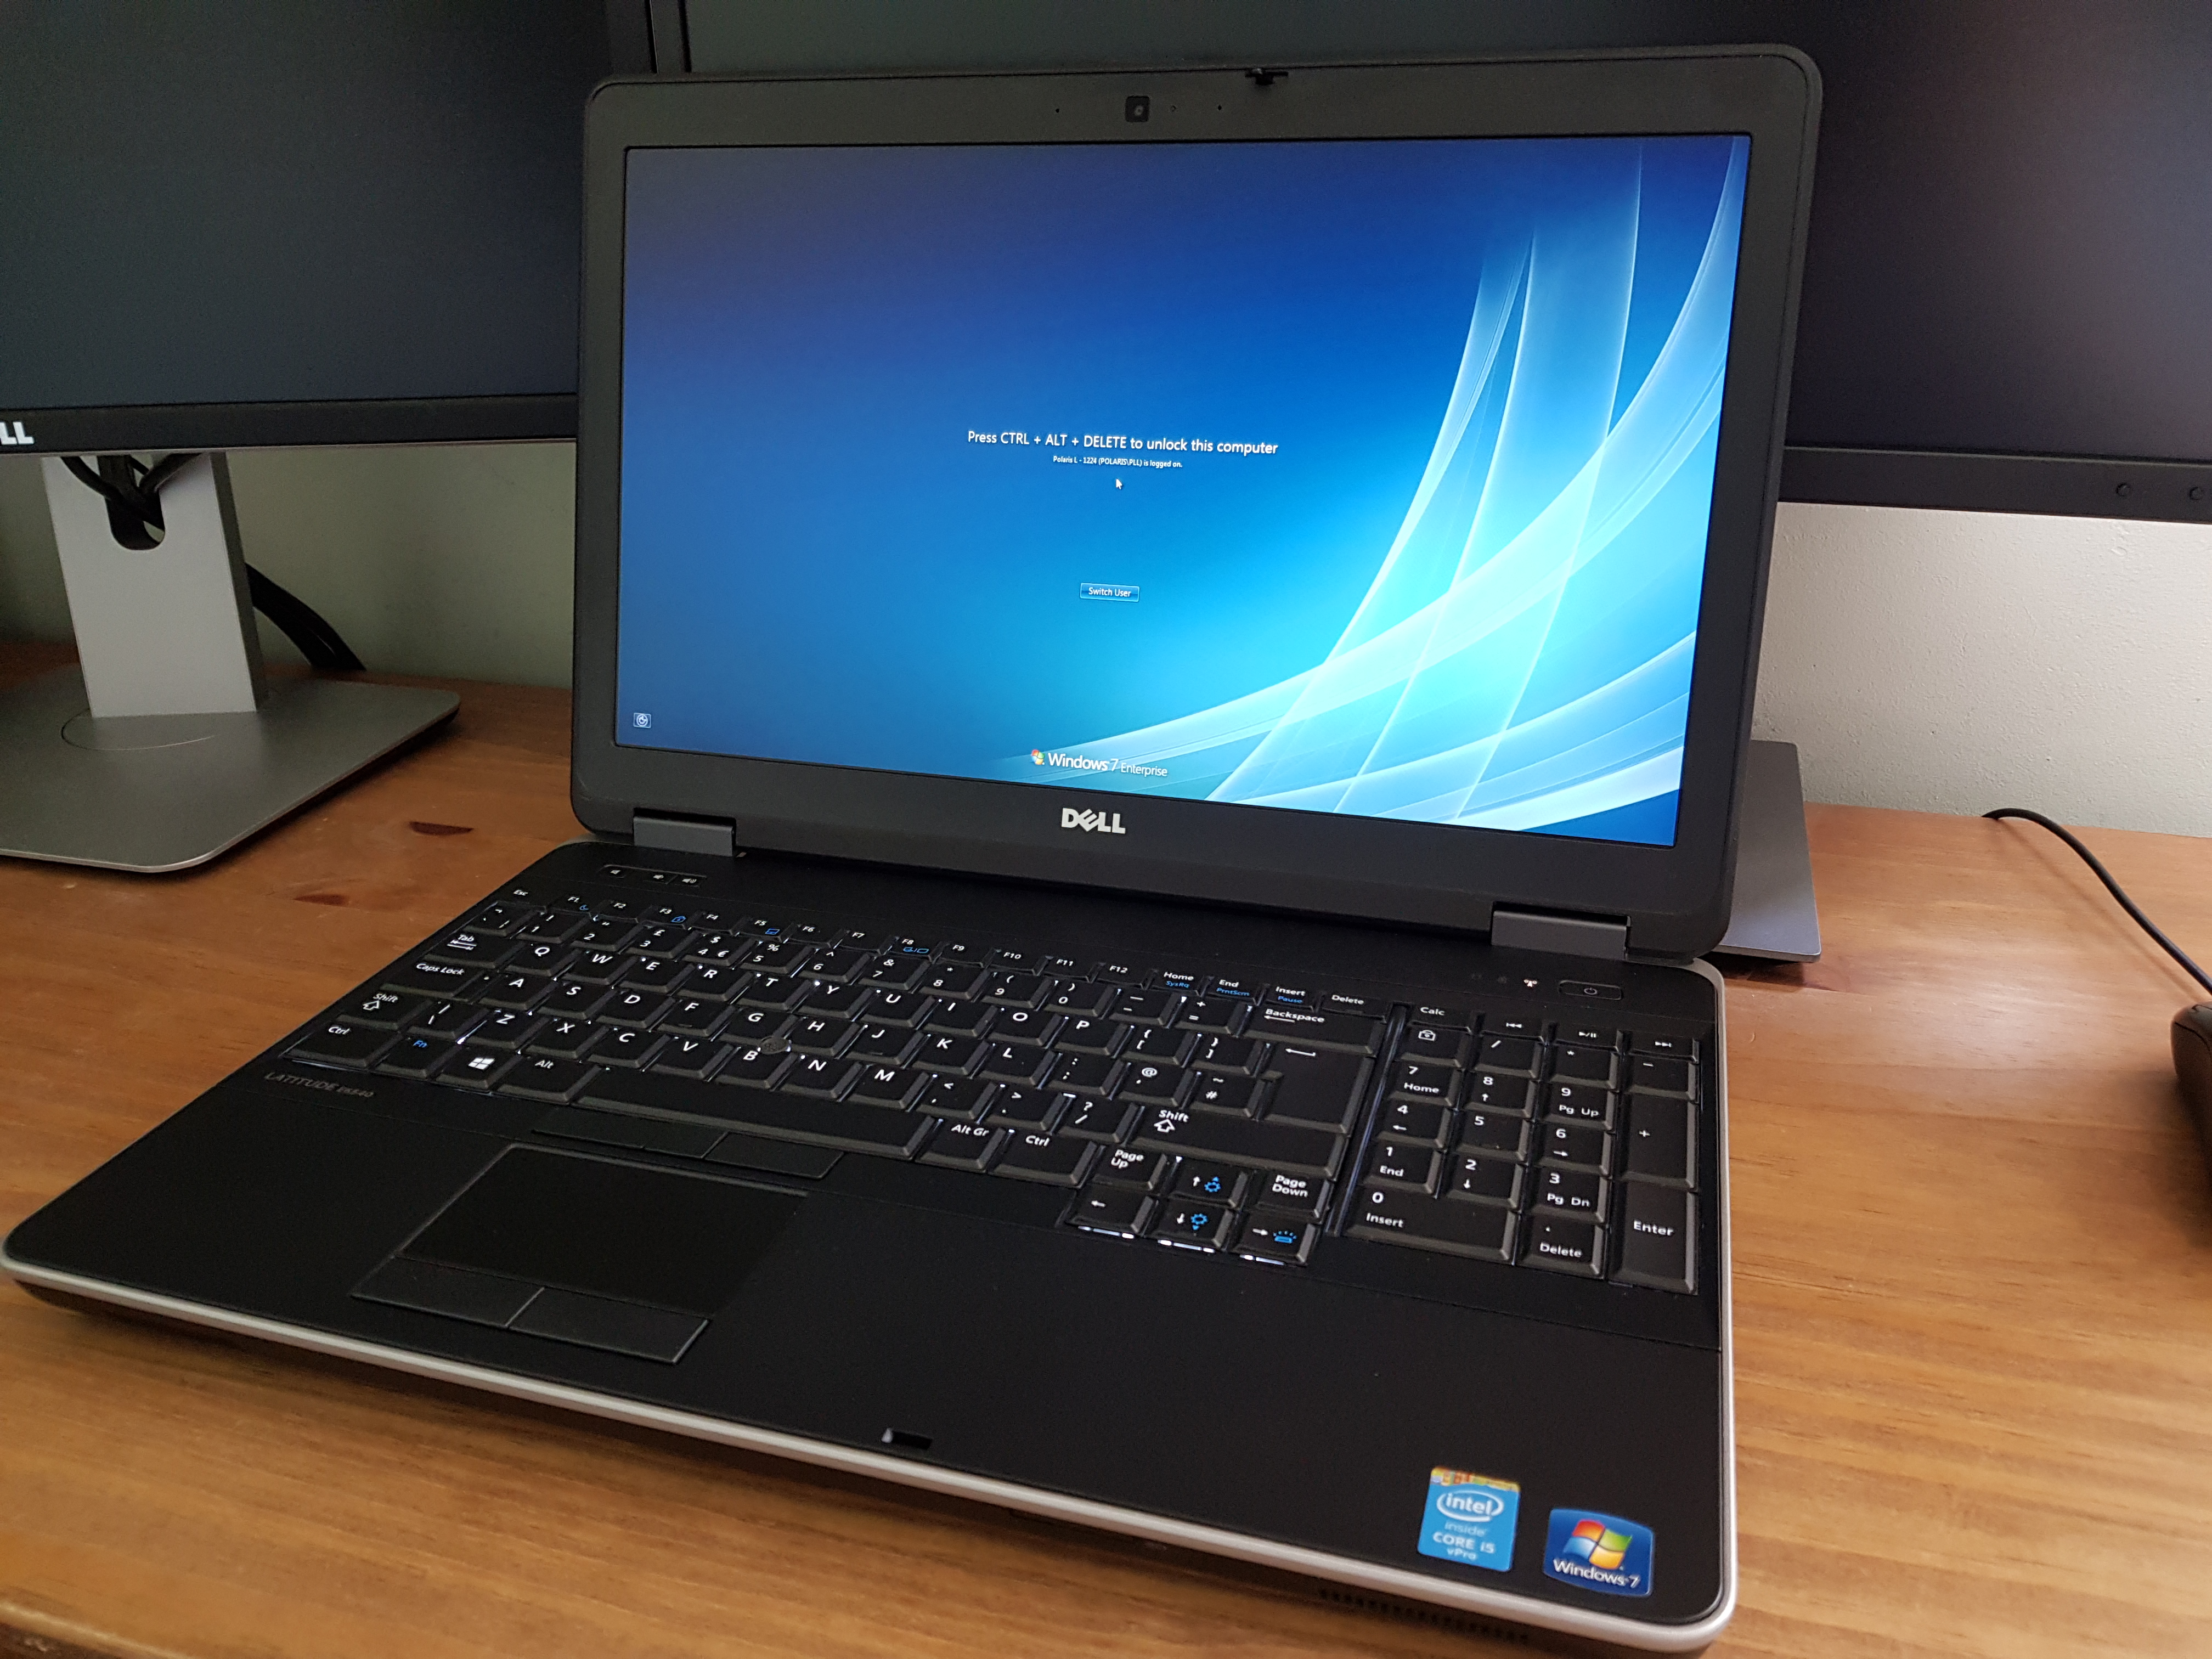 Dell laptop with outdated software and drivers